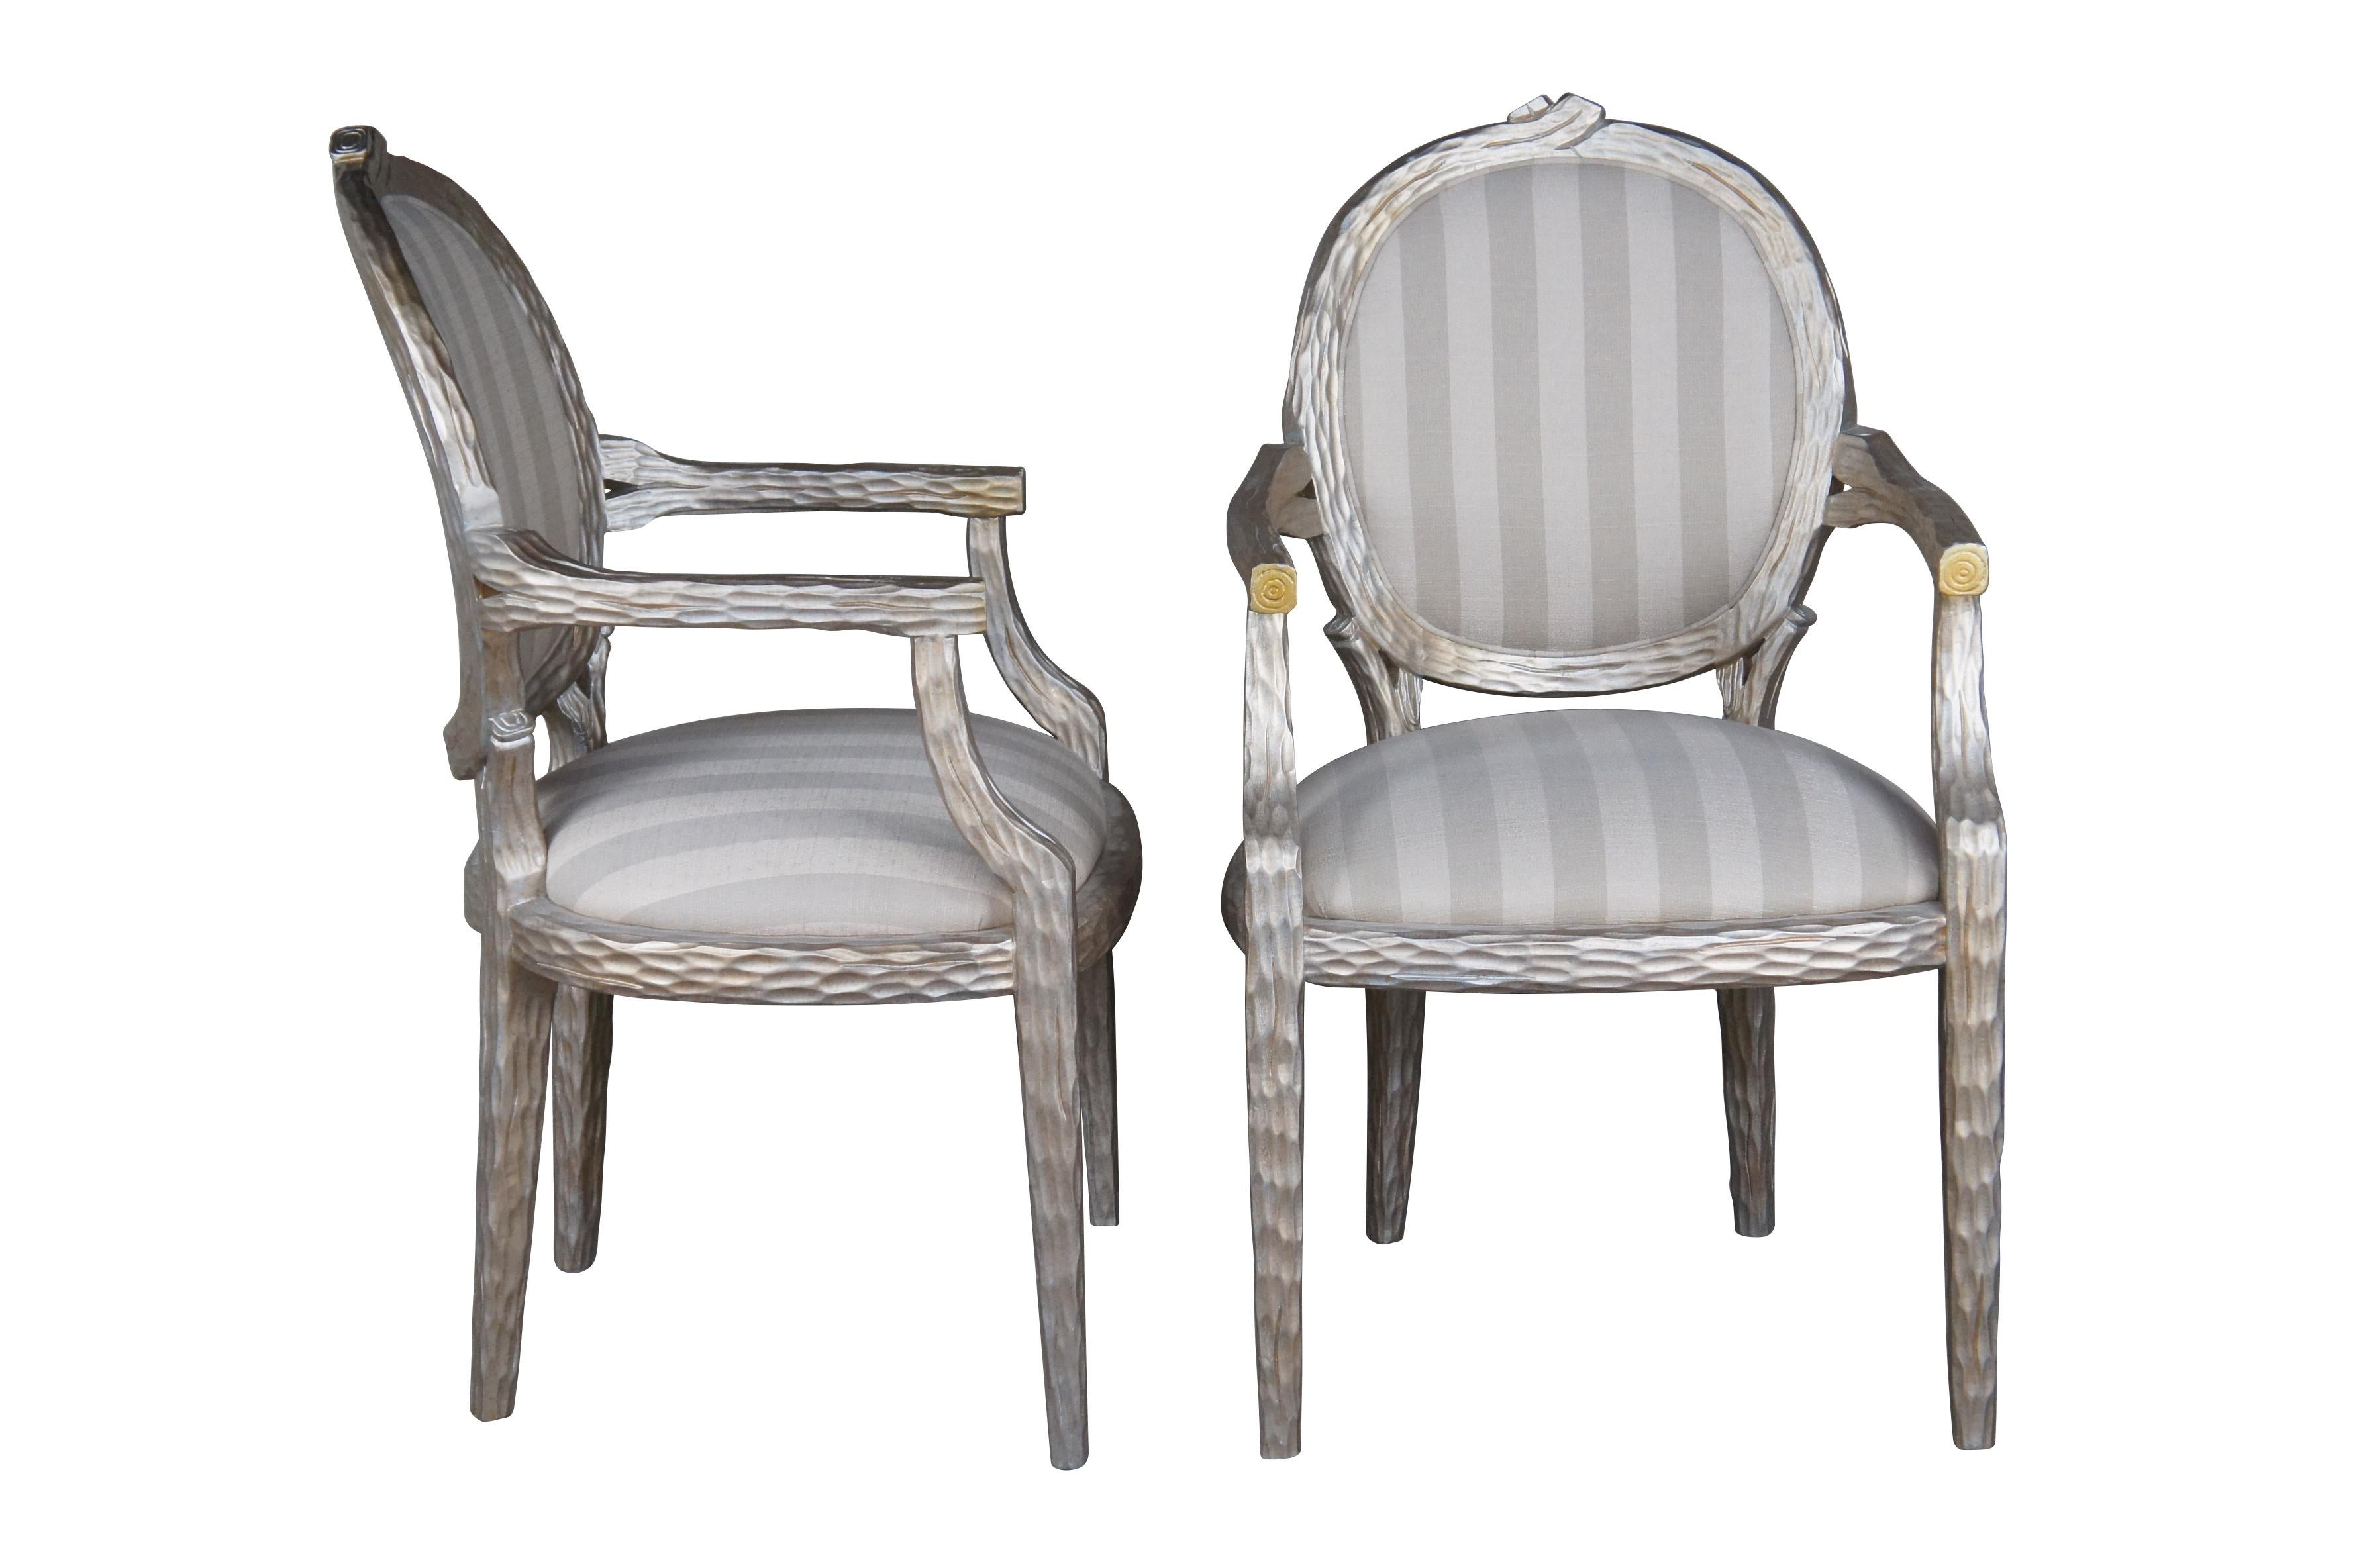 Vintage set of six Italian Regency style armchairs.  Made of birch featuring faux bois carved design with metallic Borgheses silver and gold accents and striped New Marina / Shantung / Lynx upholstery.  Made for Joseph Interiors of North Palm